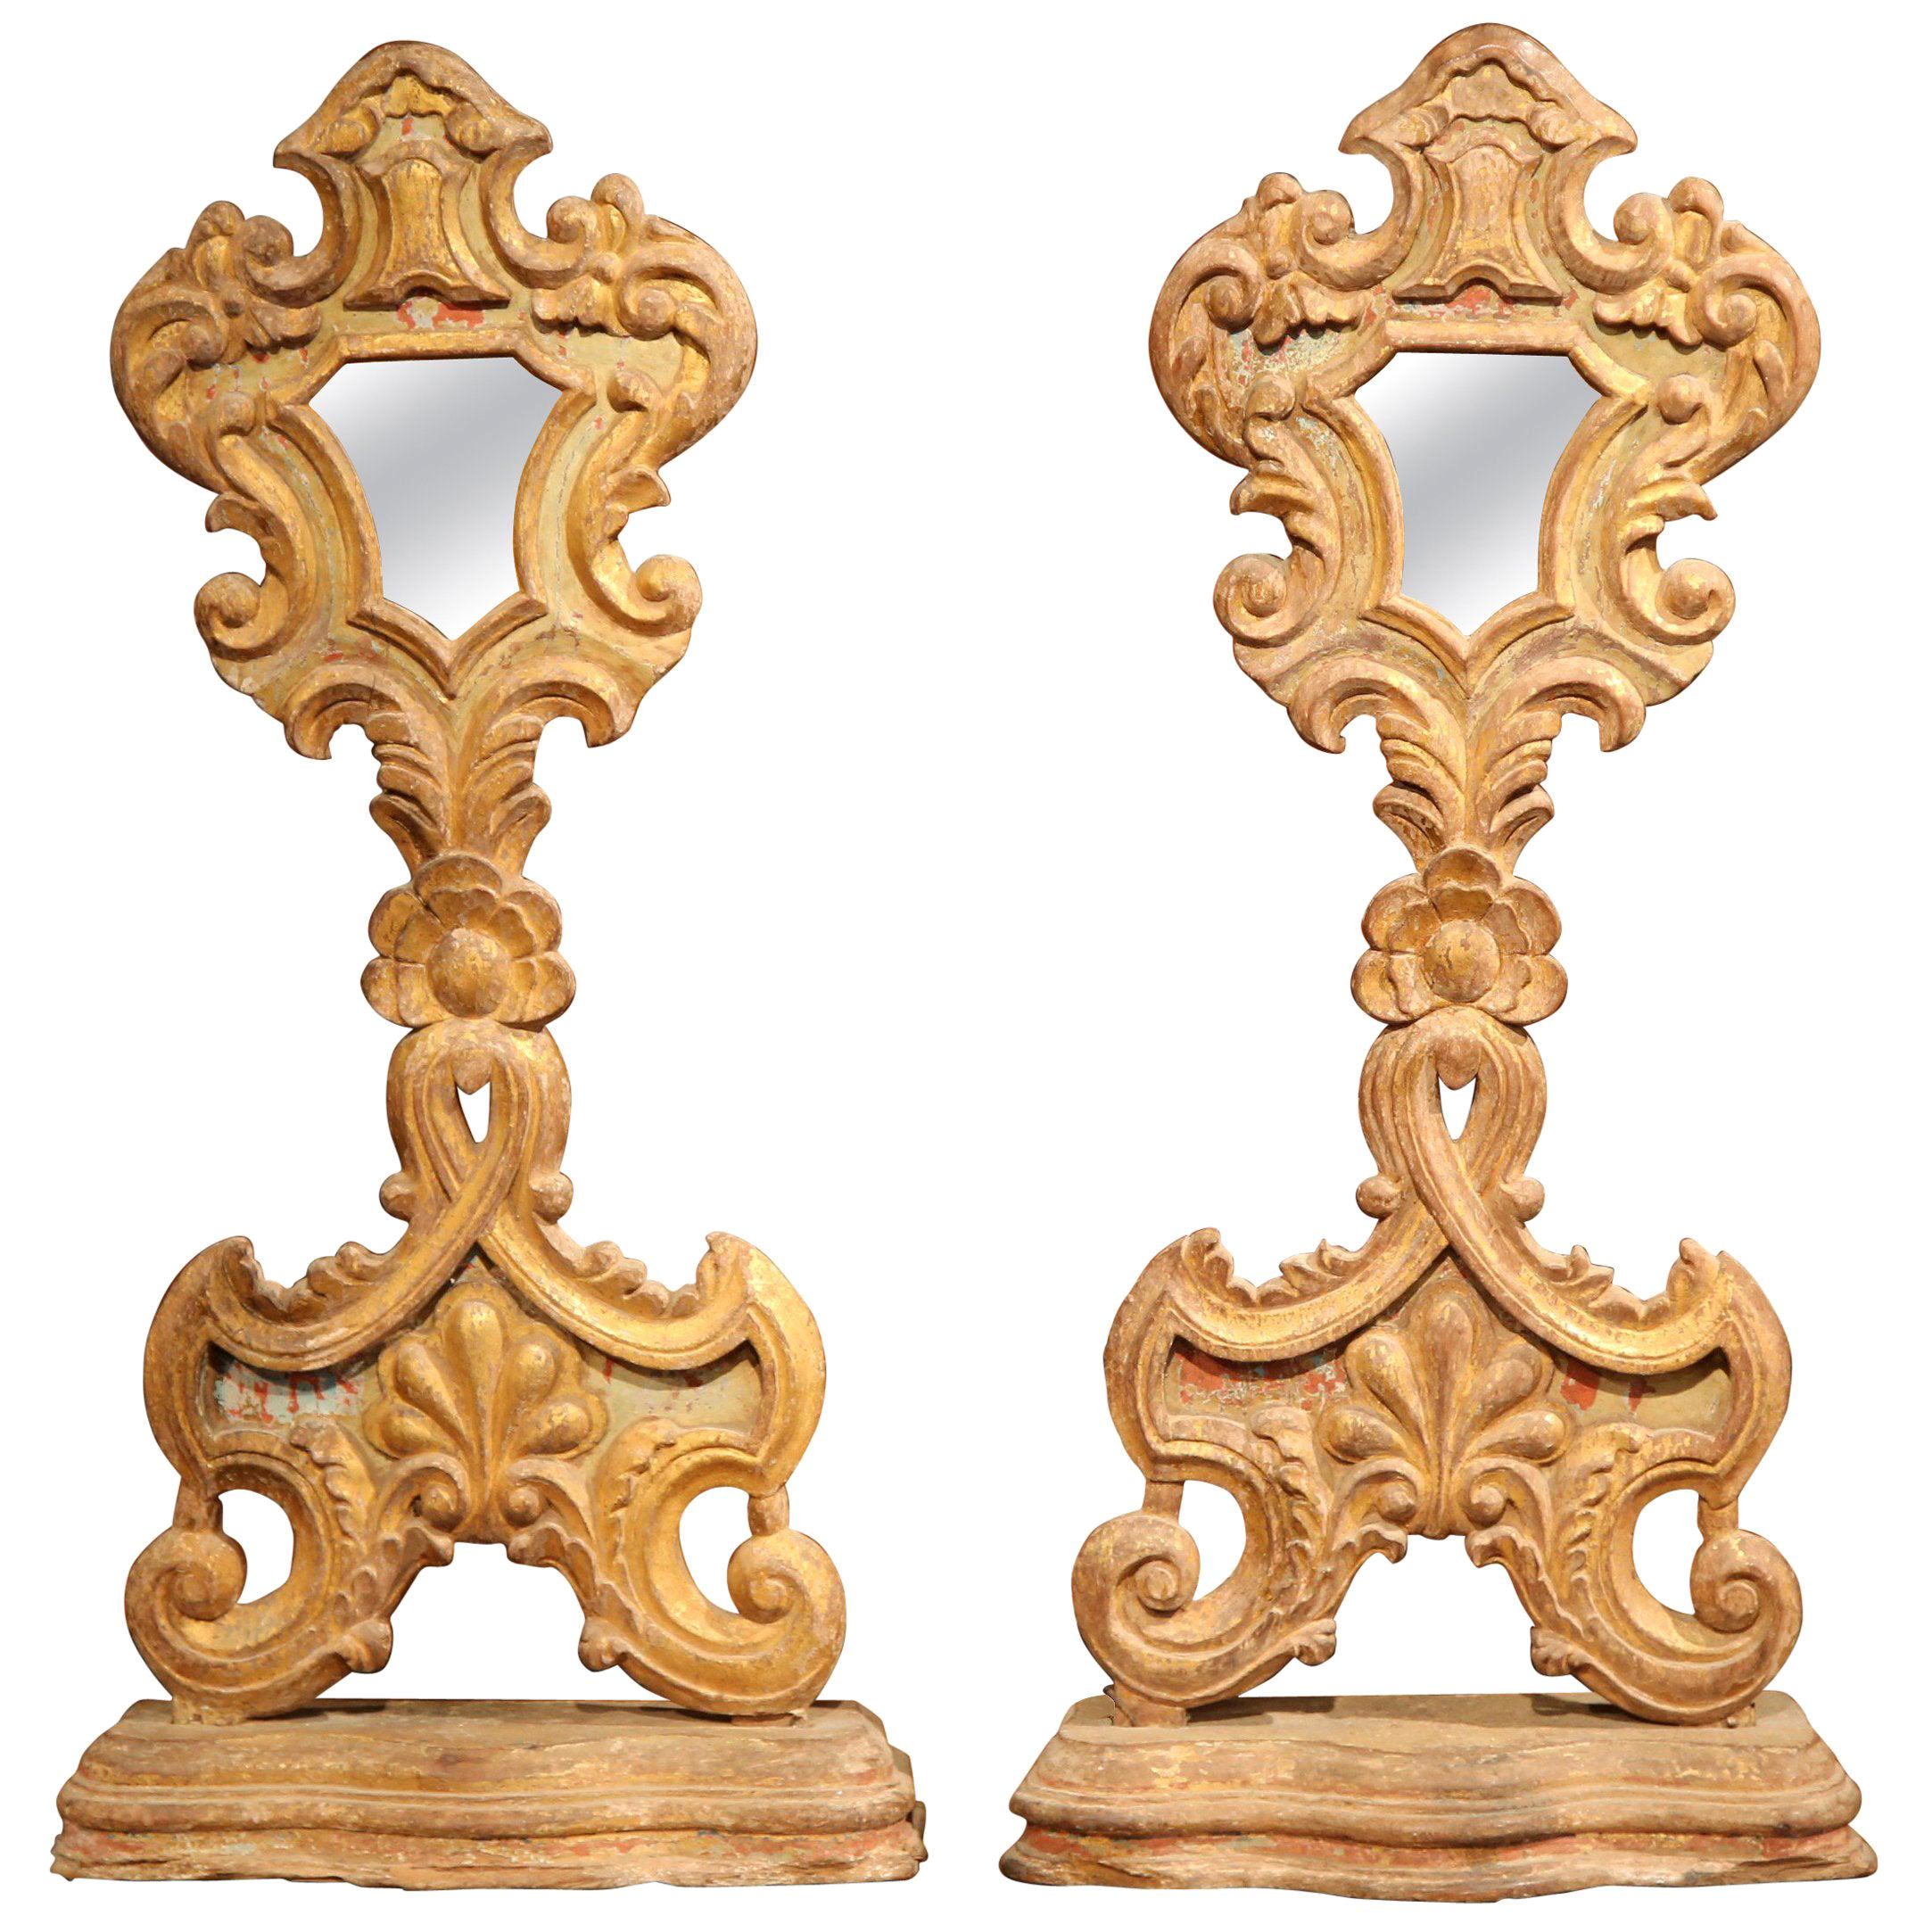 Pair of 19th Century Italian Carved Giltwood Church Reliquary Mirrors on Stand